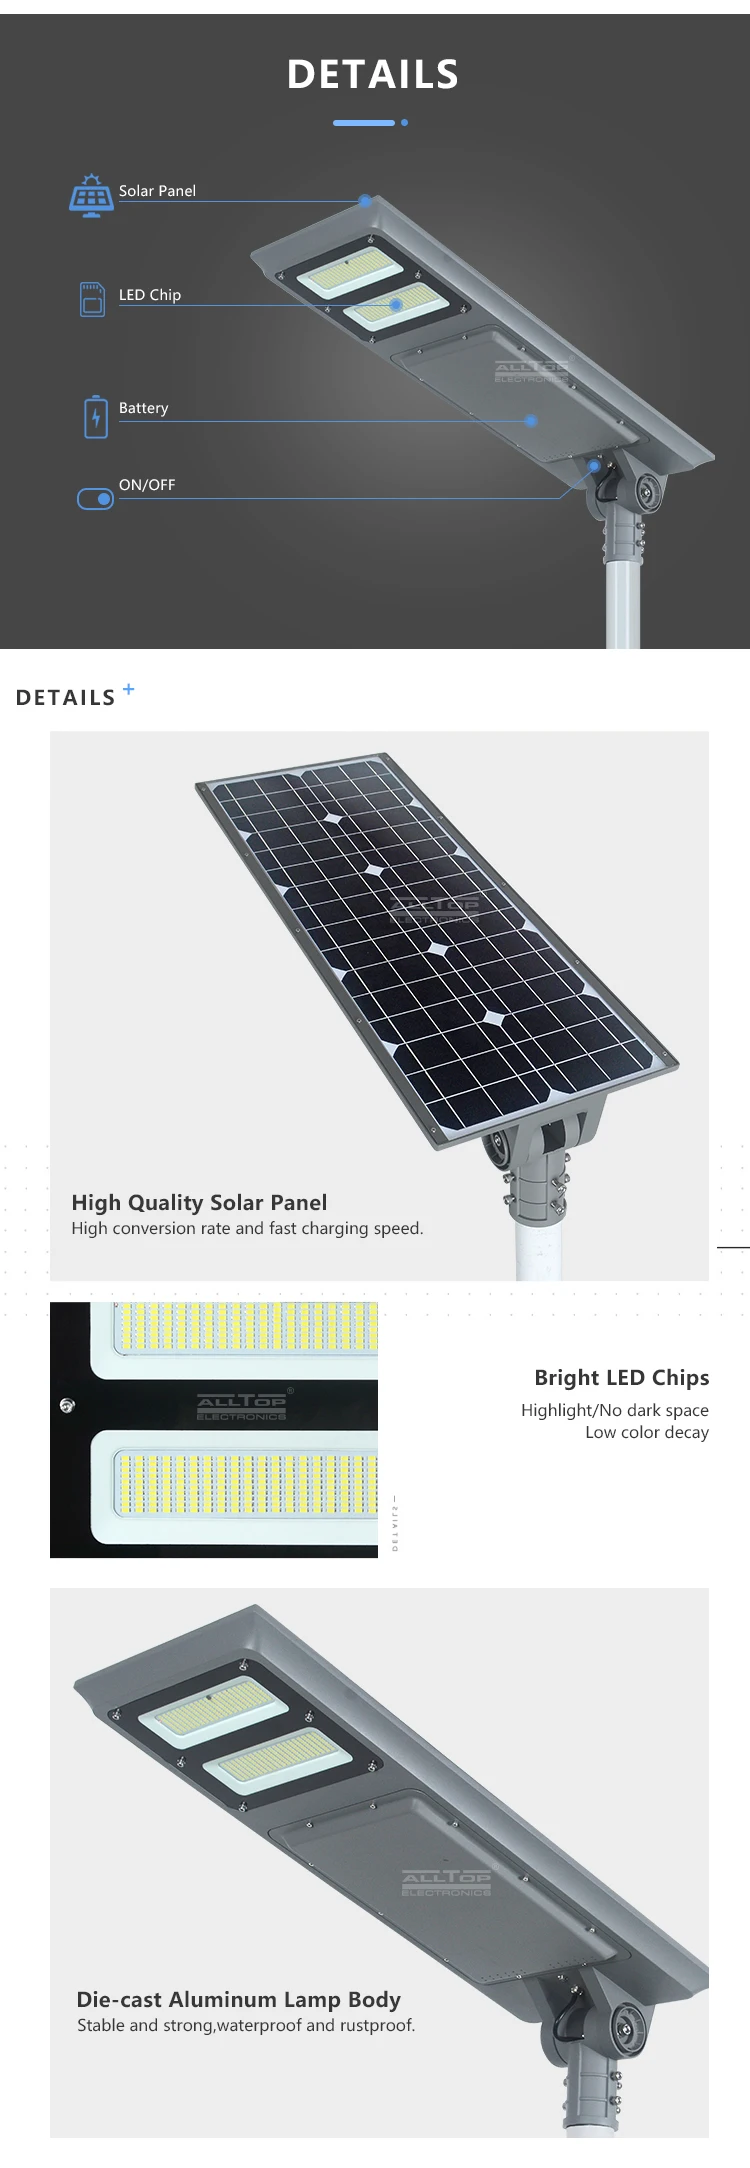 ALLTOP Hot selling waterproof outdoor lighting smd 100w ip65 all in one led solar garden lamp